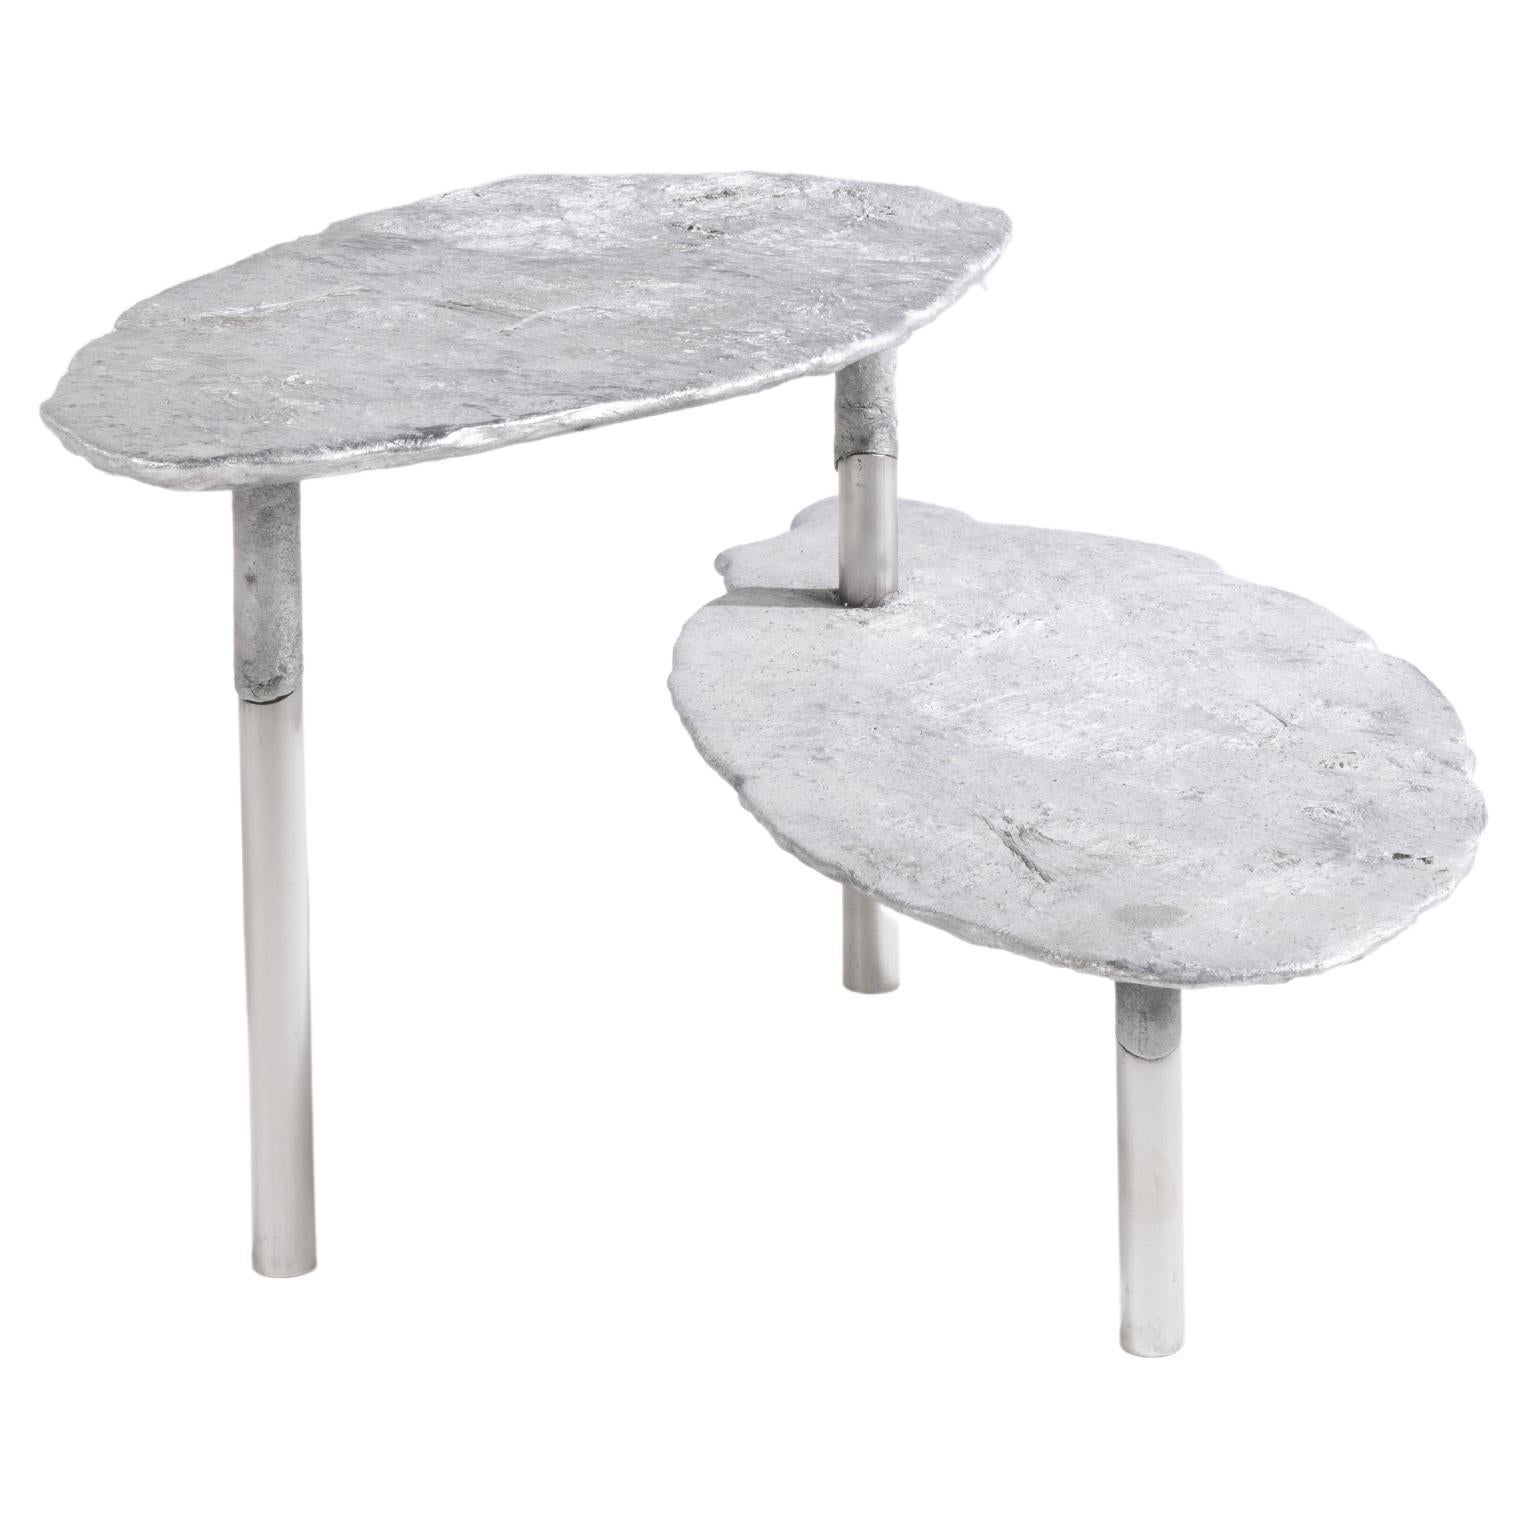 Aluminum Concretion Coffee Table by Studio Julien Manaira For Sale